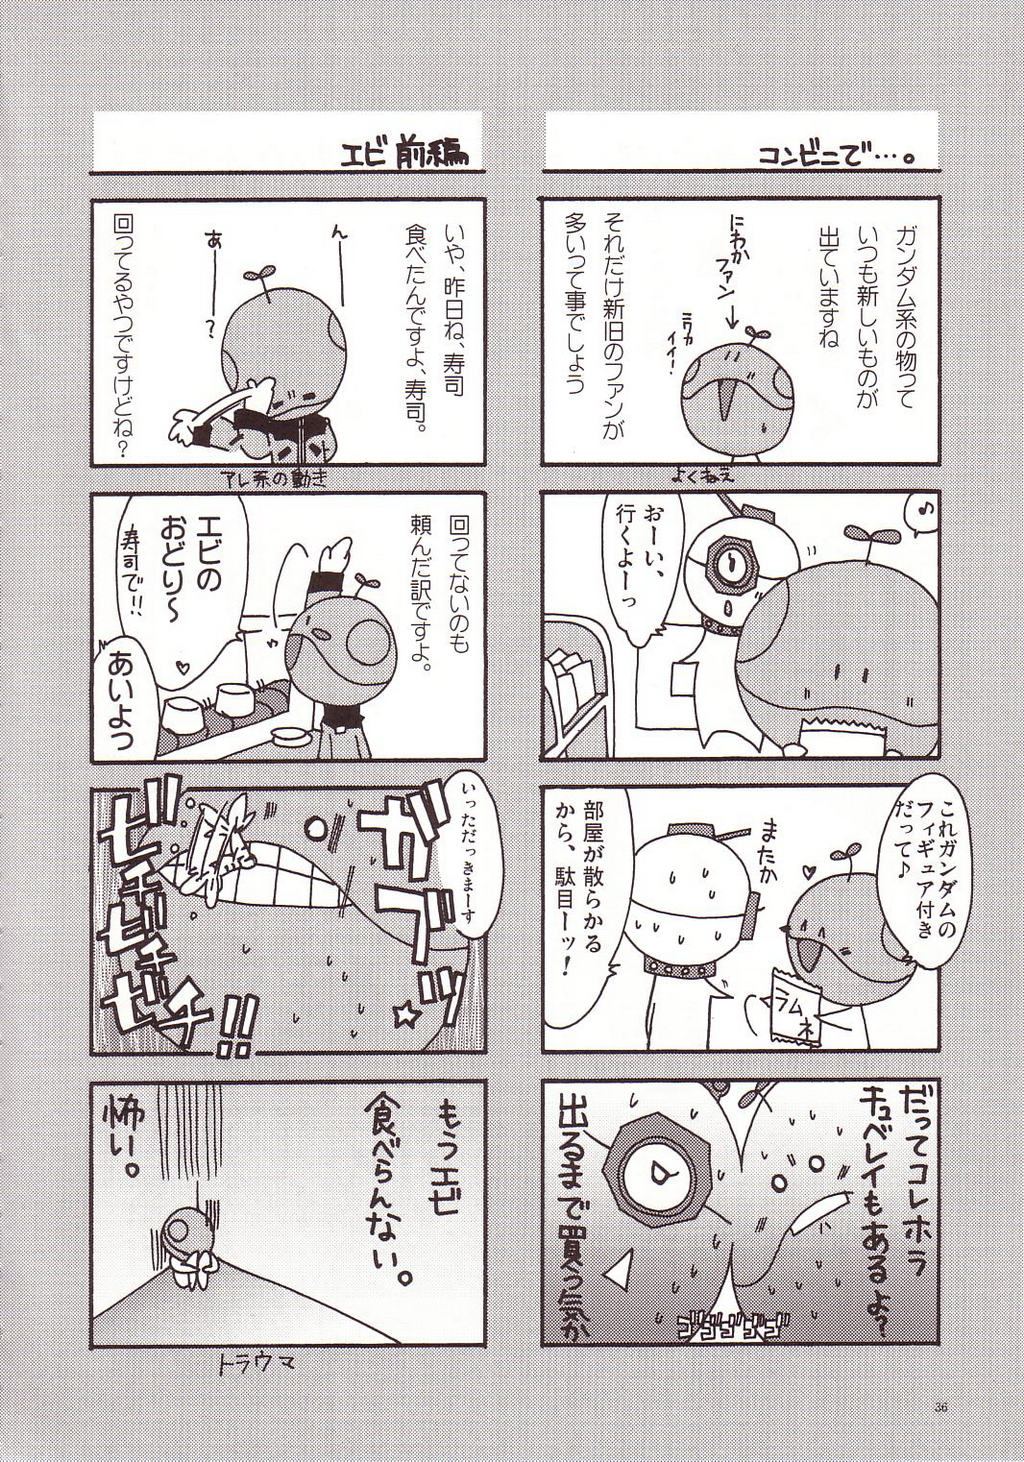 [AKABEi SOFT (Alpha)] Aishitai I WANT TO LOVE (Mobile Suit Gundam Char's Counterattack) page 35 full